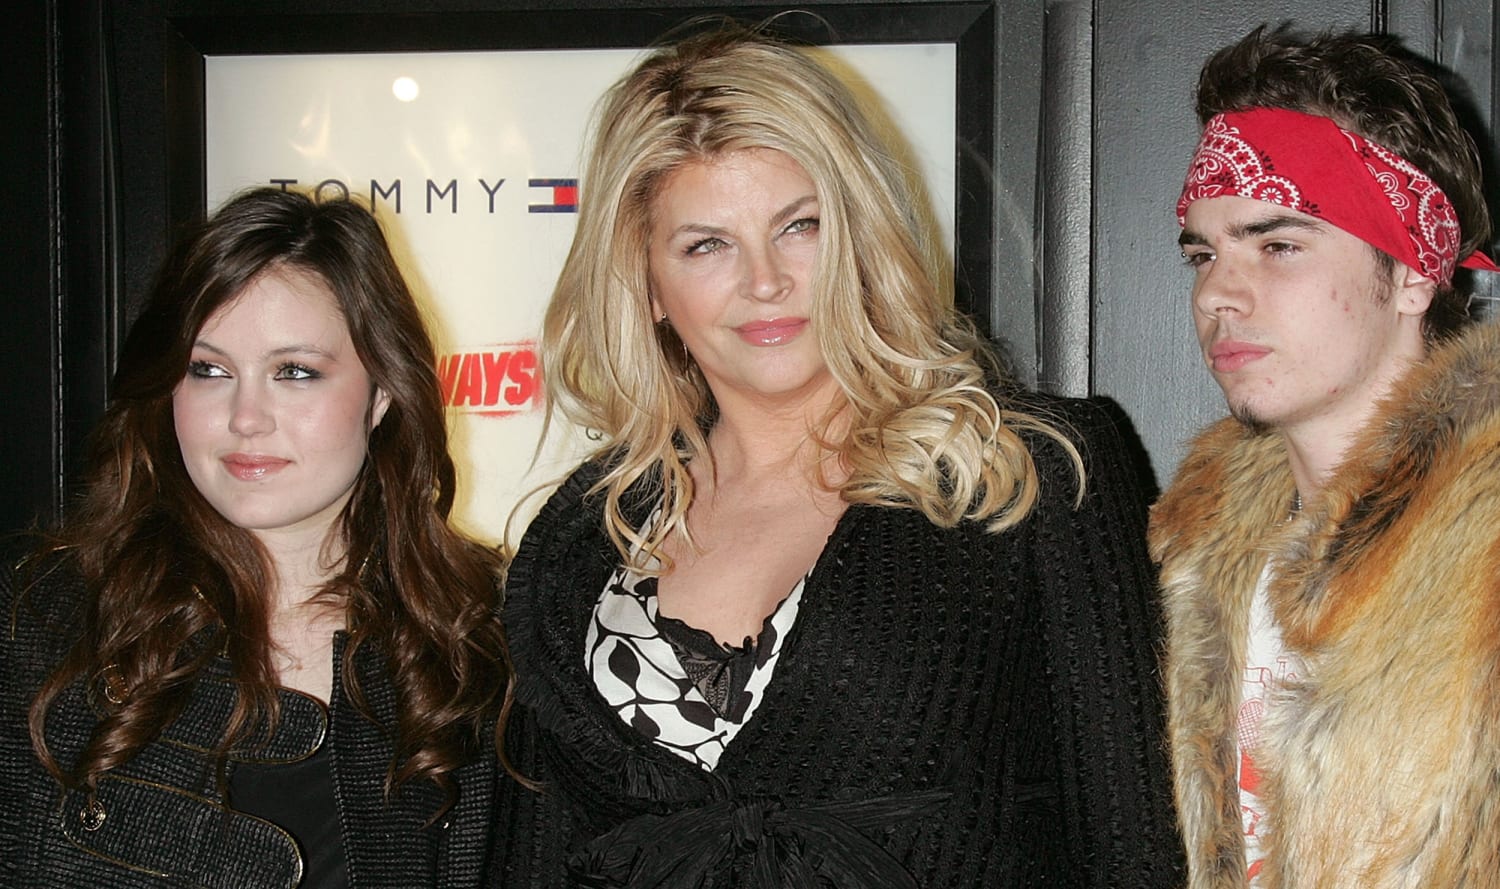 What to know about Kirstie Alley's kids who shared news of her death